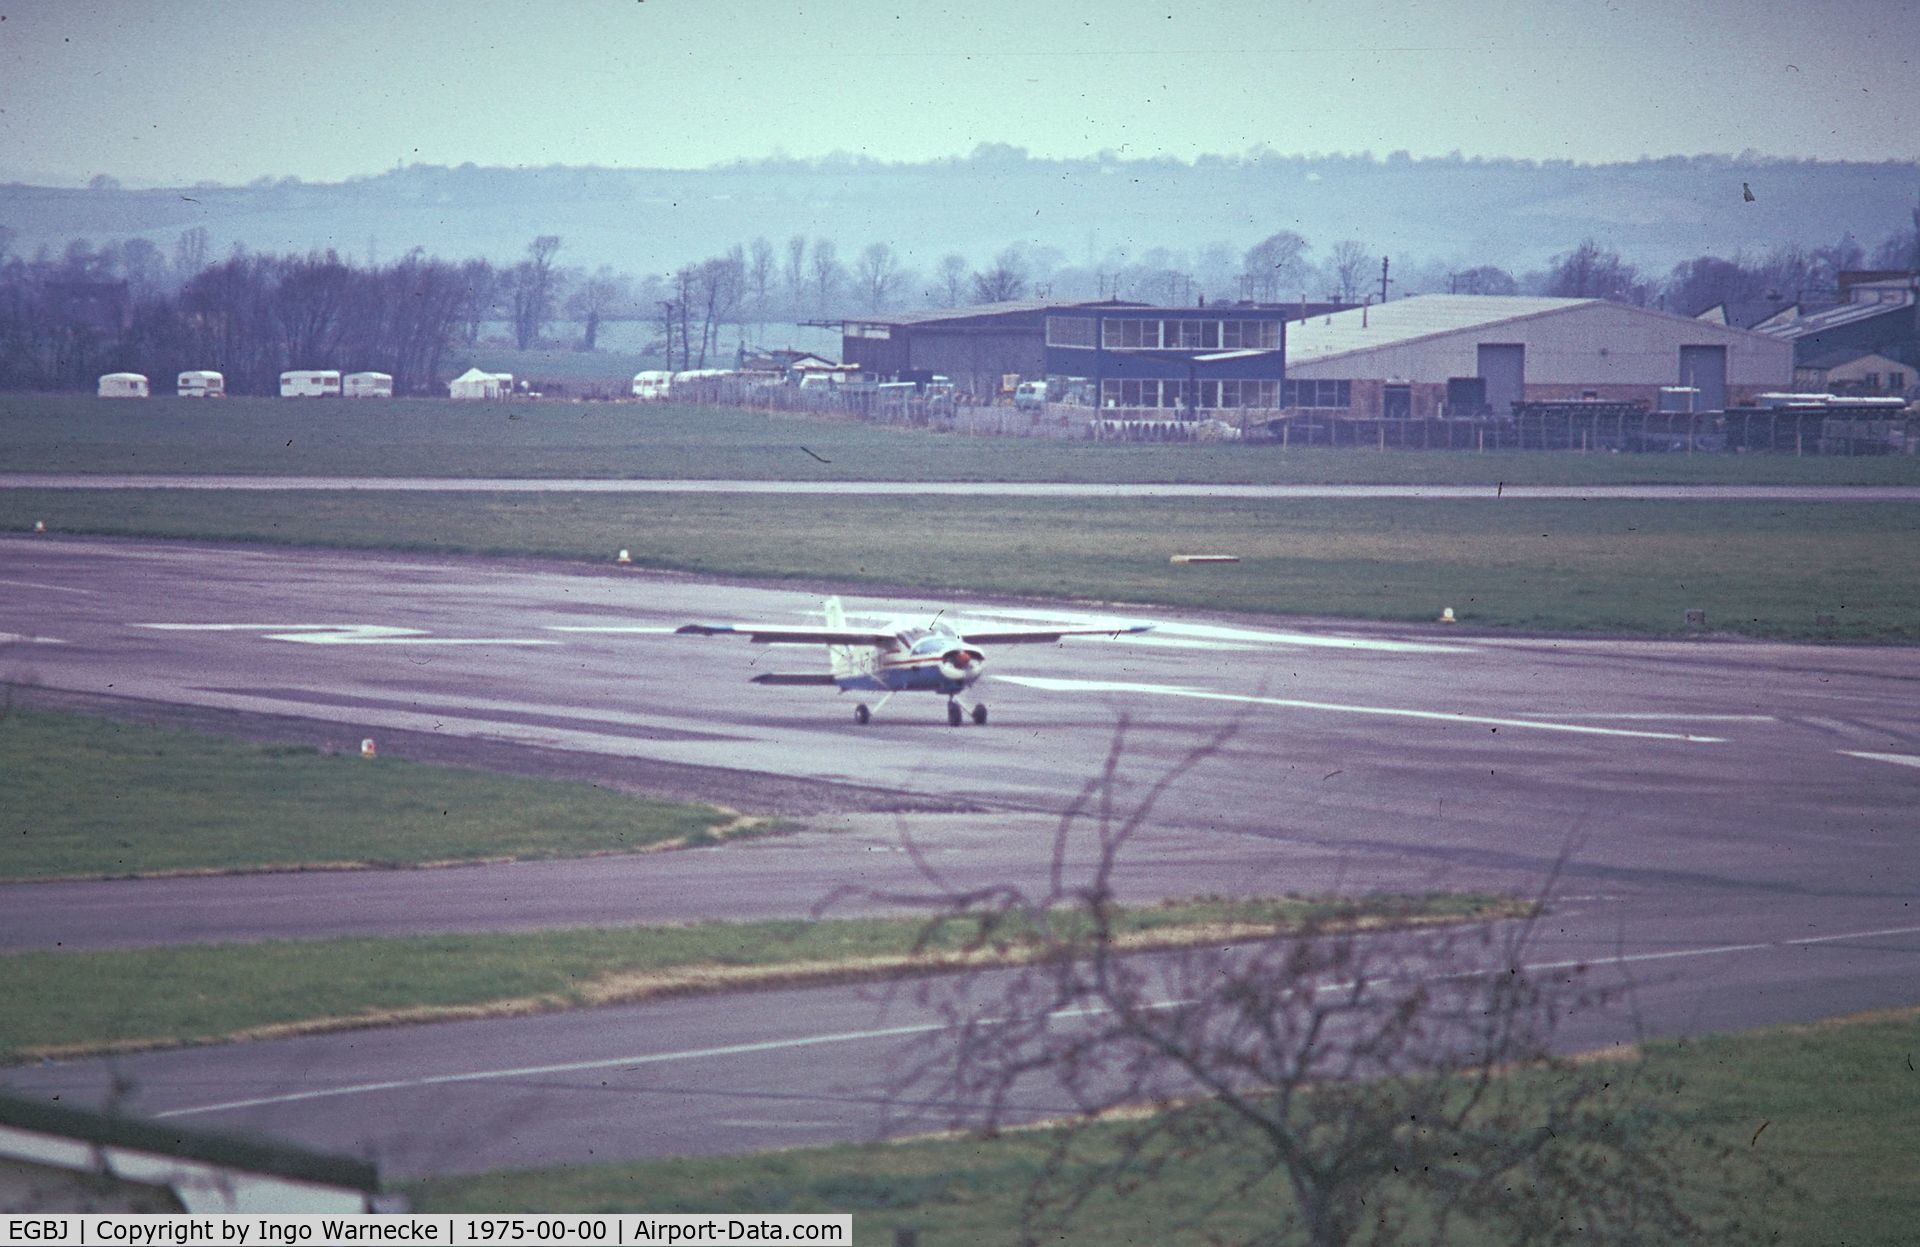 Gloucestershire Airport, Staverton, England United Kingdom (EGBJ) - a day at Staverton airfield